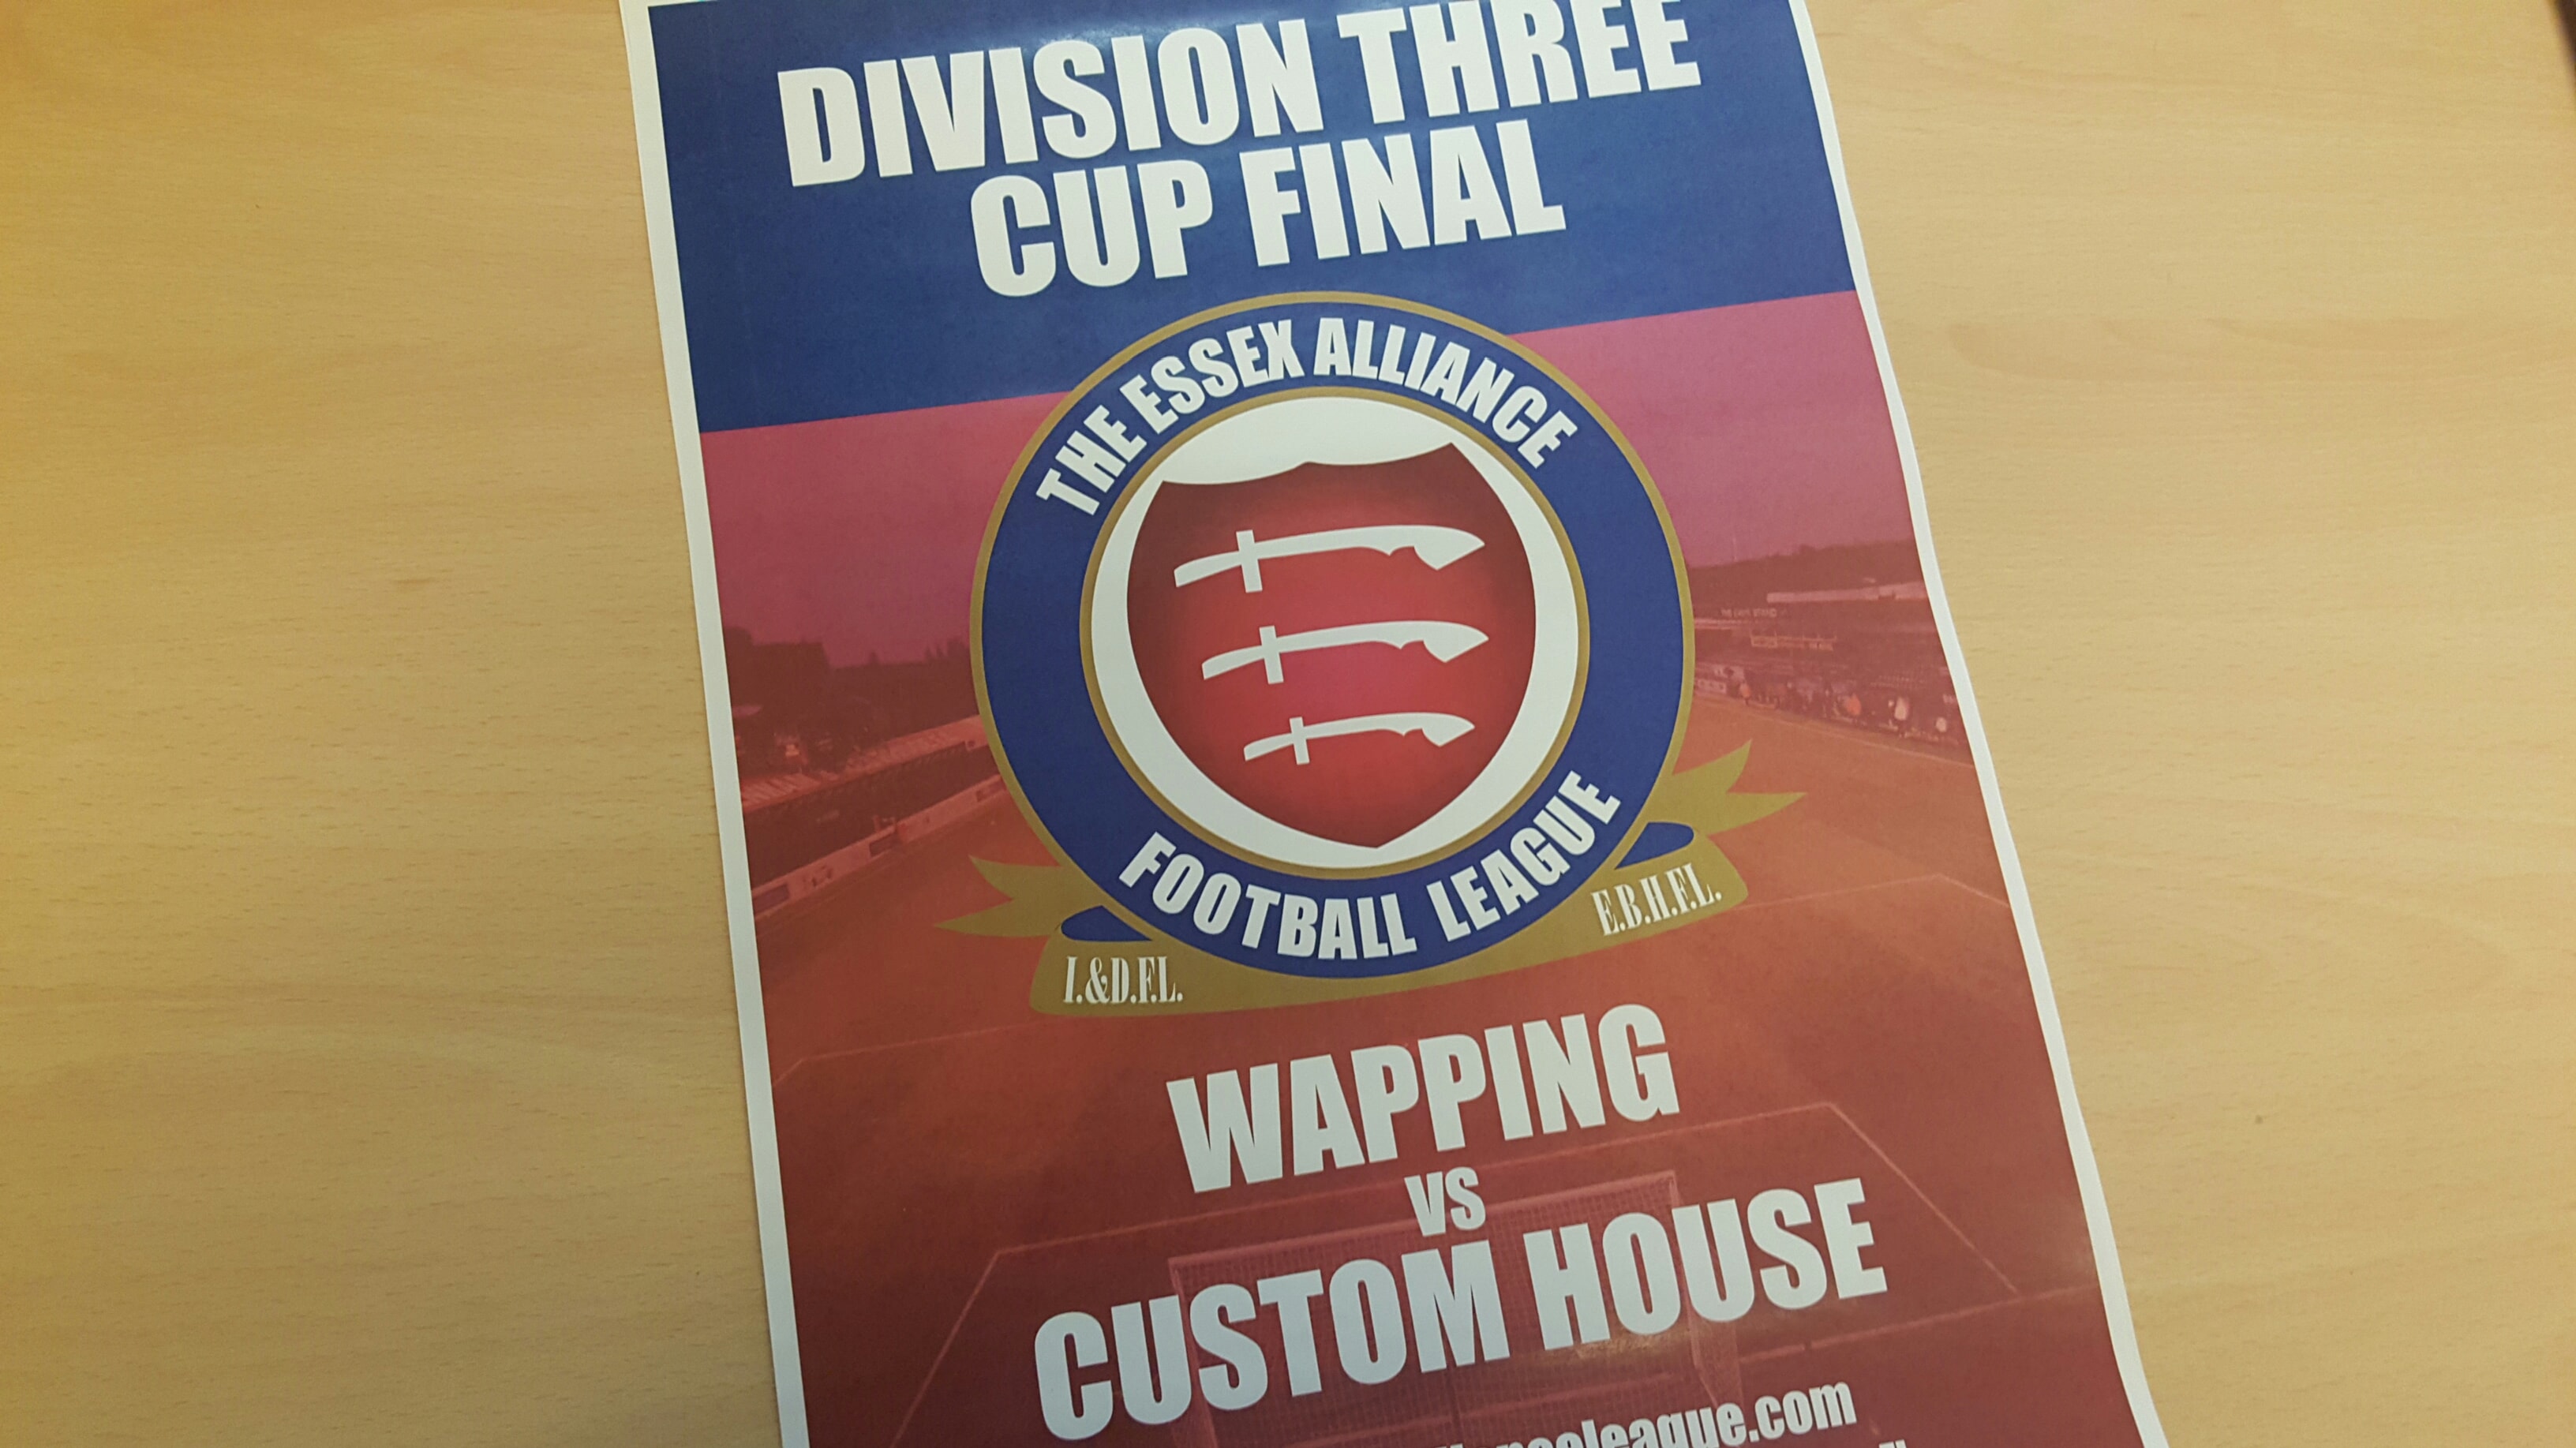 CUP FINAL PREVIEW: Wapping face Custom House in Division 3 Cup climax